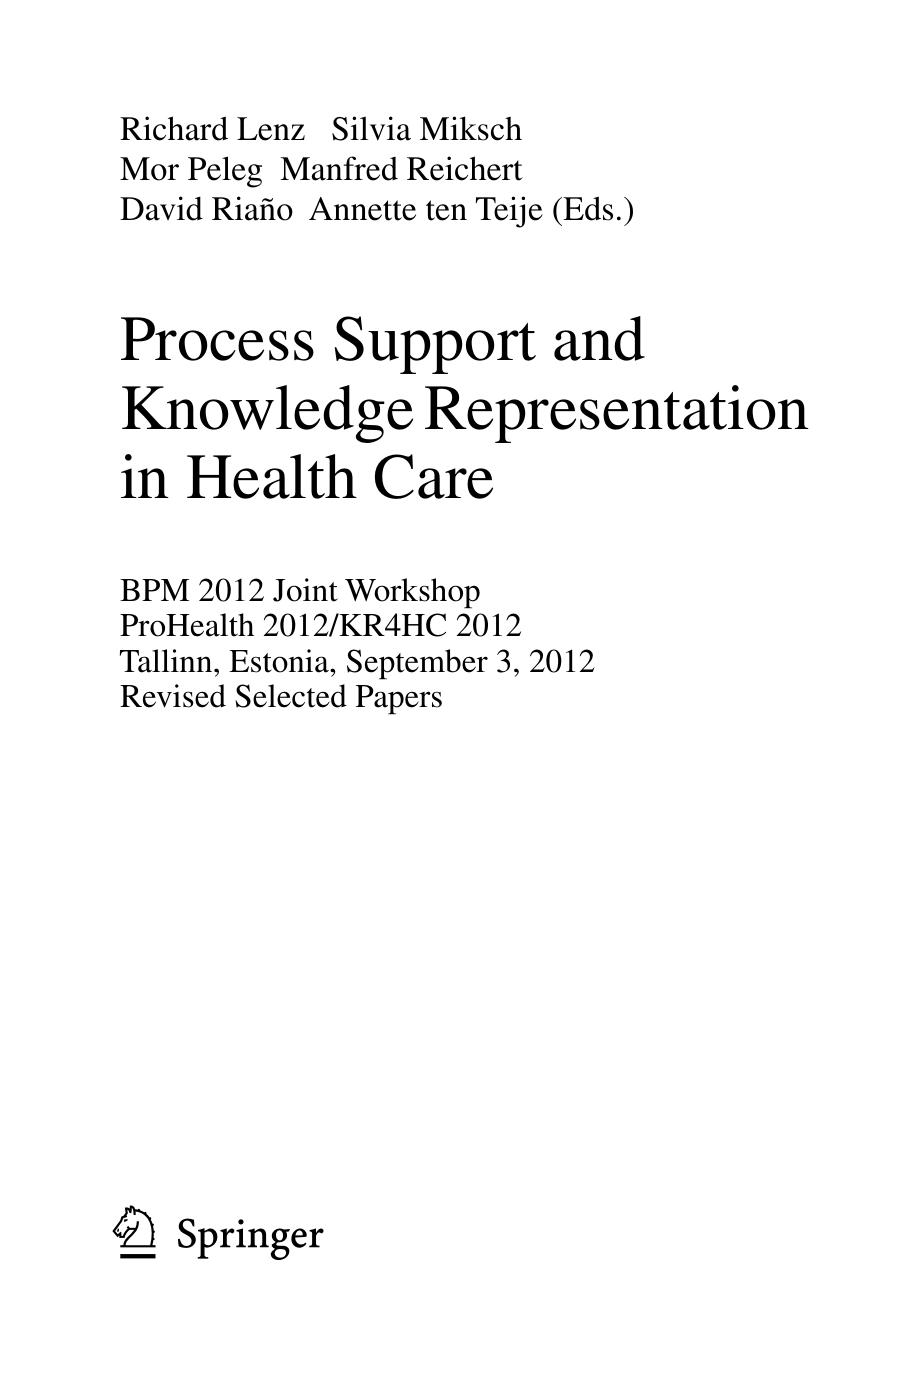 Process Support and Knowledge Representation in Health Care: BPM 2012 Joint Workshop, ProHealth 2012/KR4HC 2012, Tallinn, Estonia, September 3, 2012, Revised Selected Papers